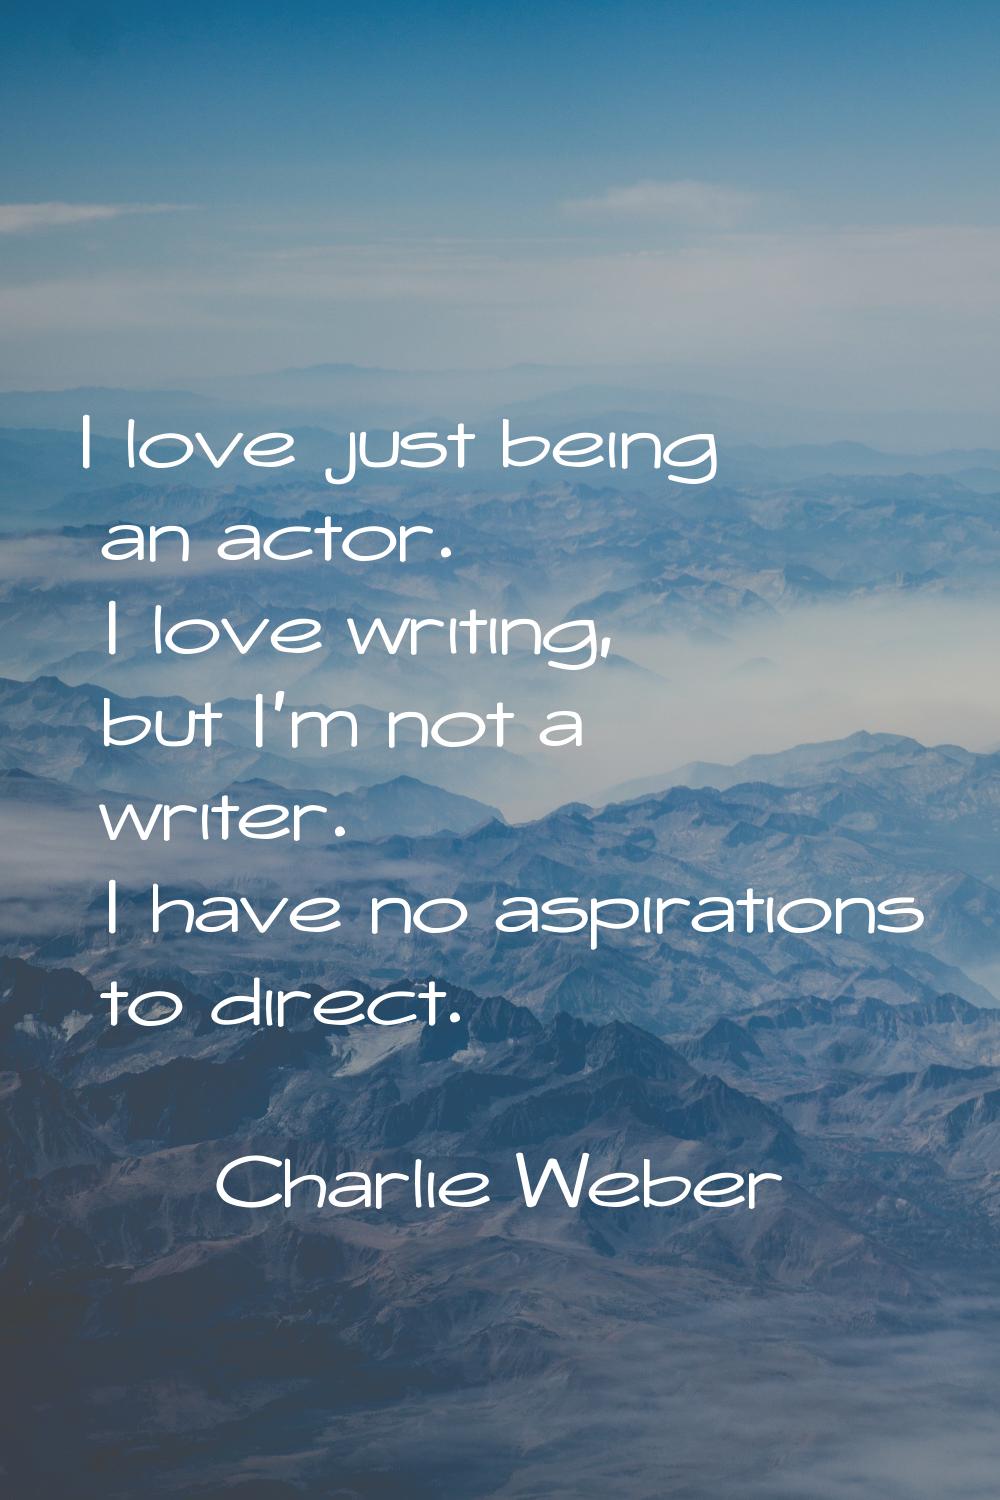 I love just being an actor. I love writing, but I'm not a writer. I have no aspirations to direct.